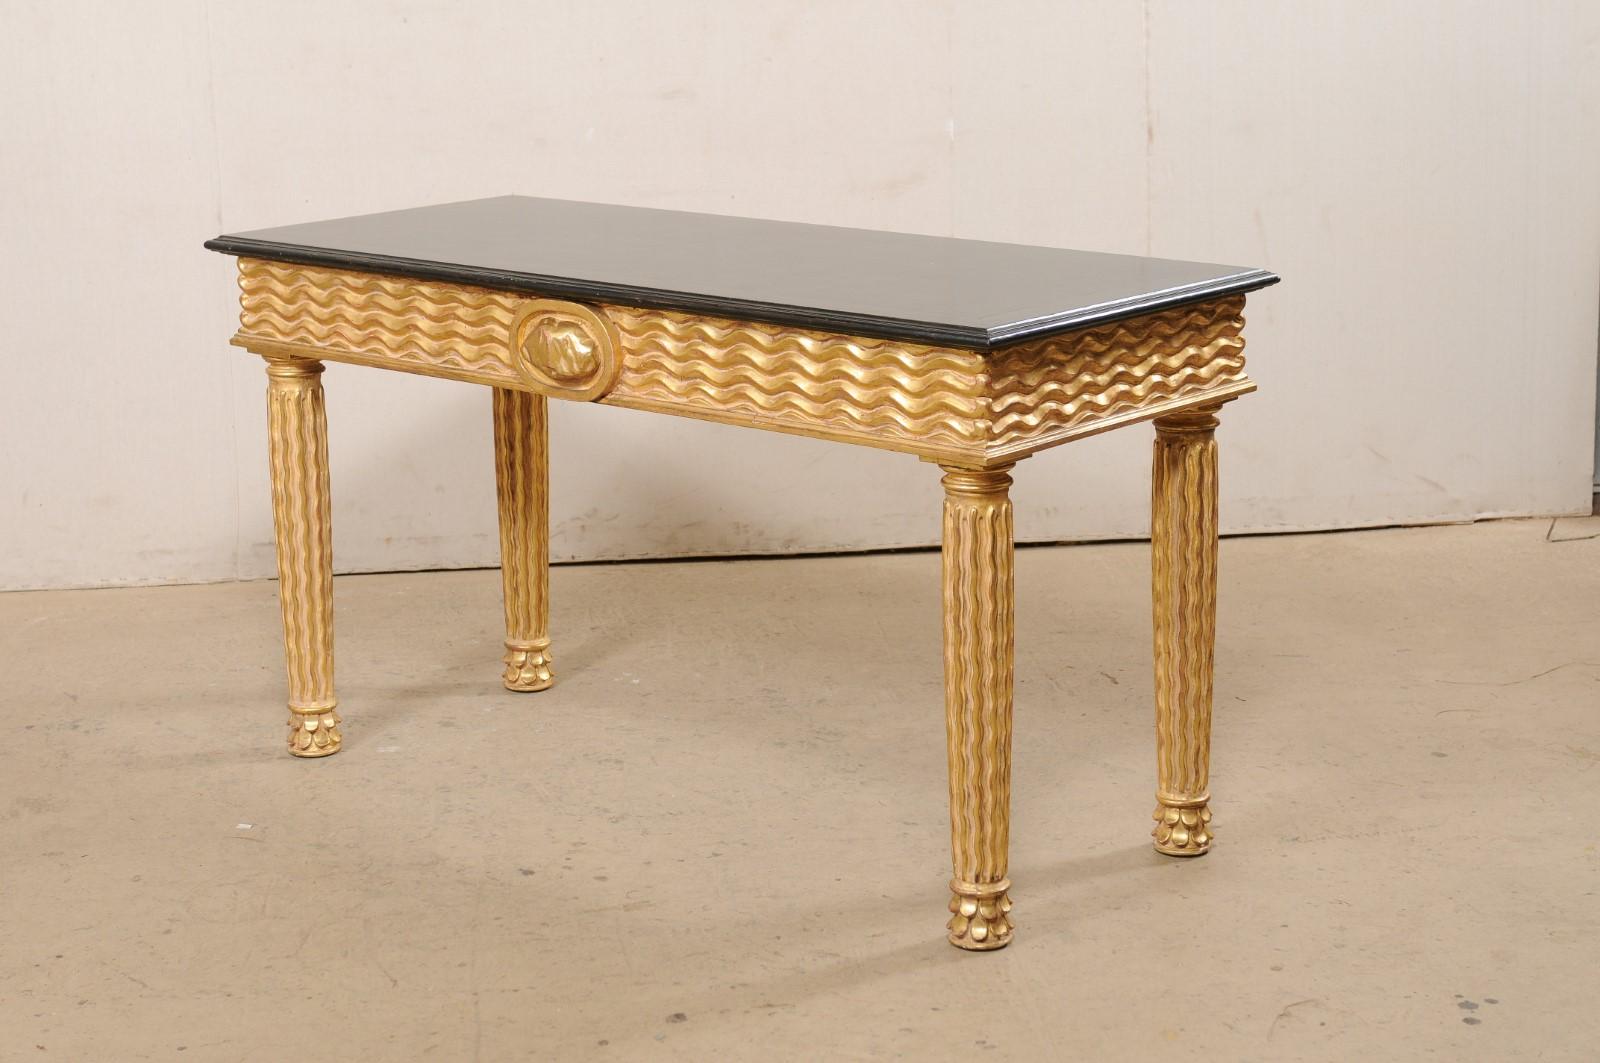 Italian Masterfully Hand-Carved Wooden Console Table with Real Gold Leafing For Sale 7